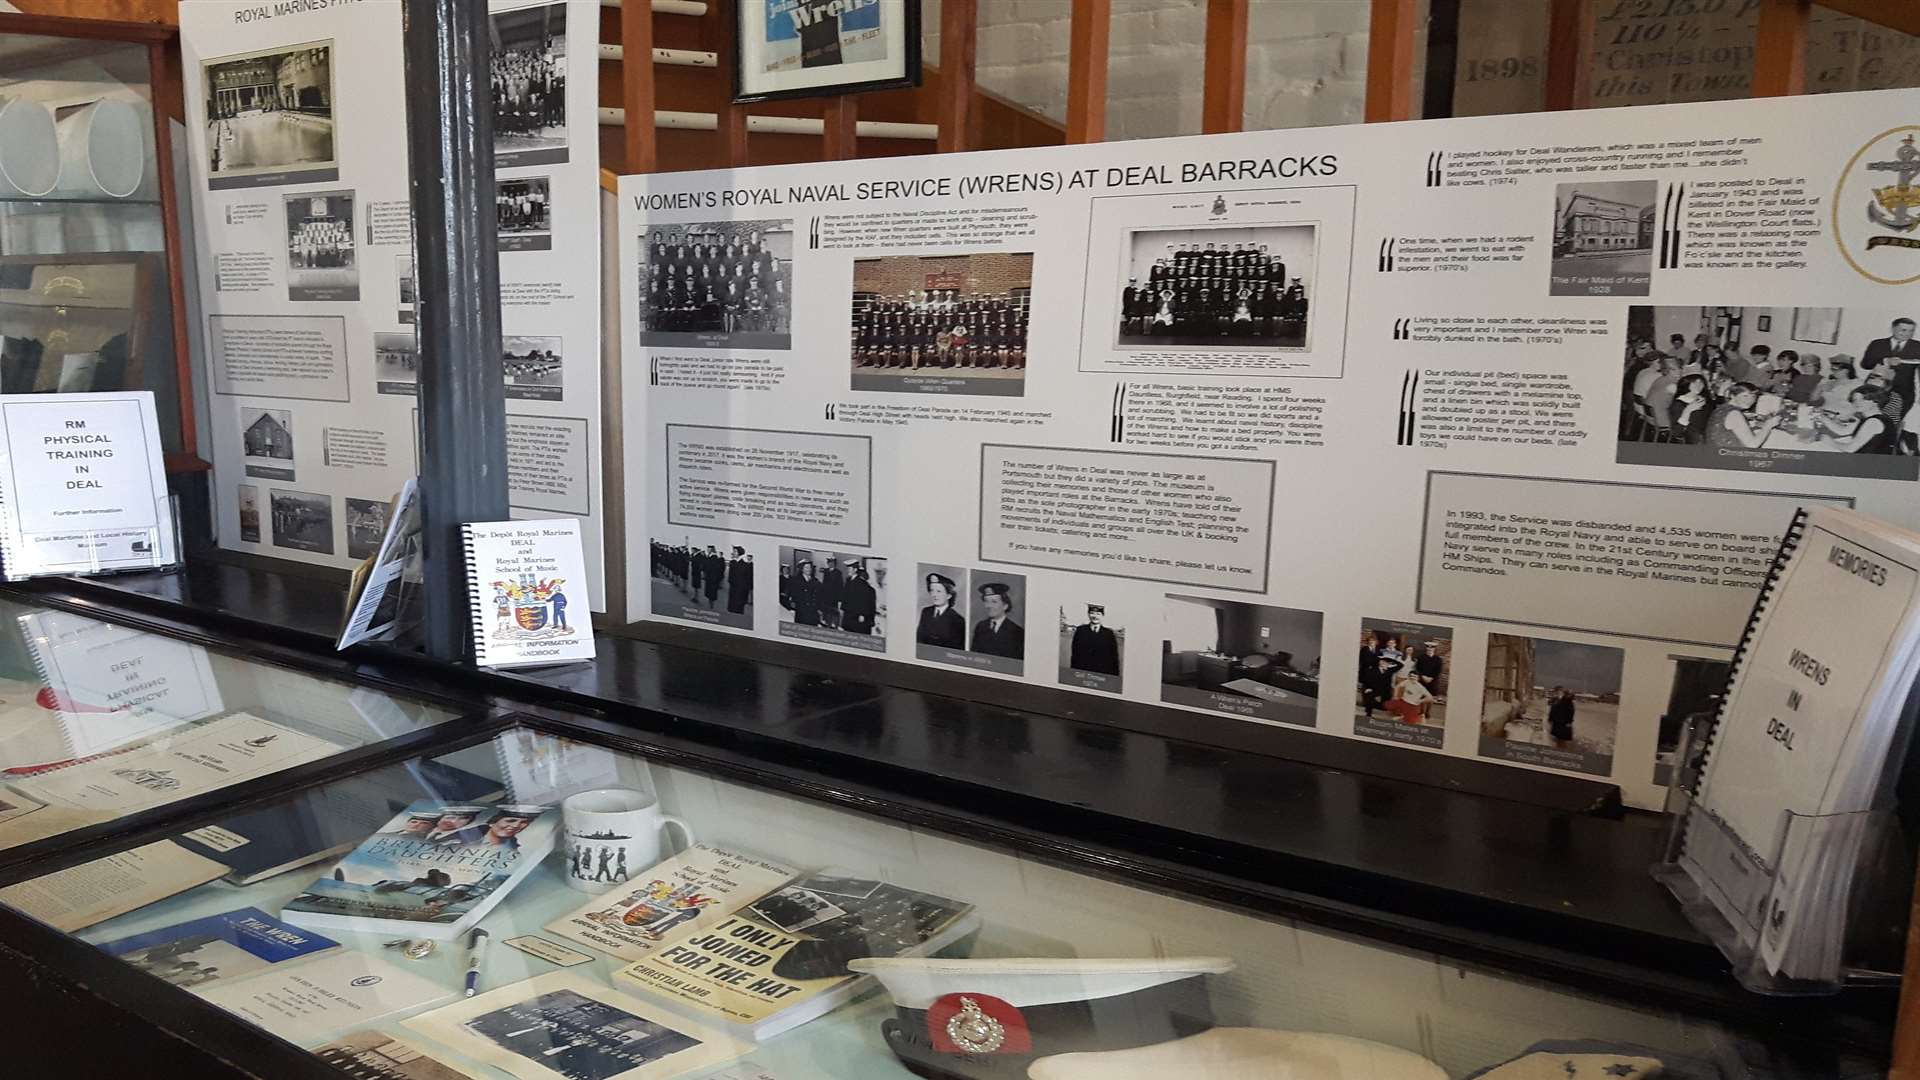 The Wrens who served at Deal are featured in the revised Royal Marines exhibition